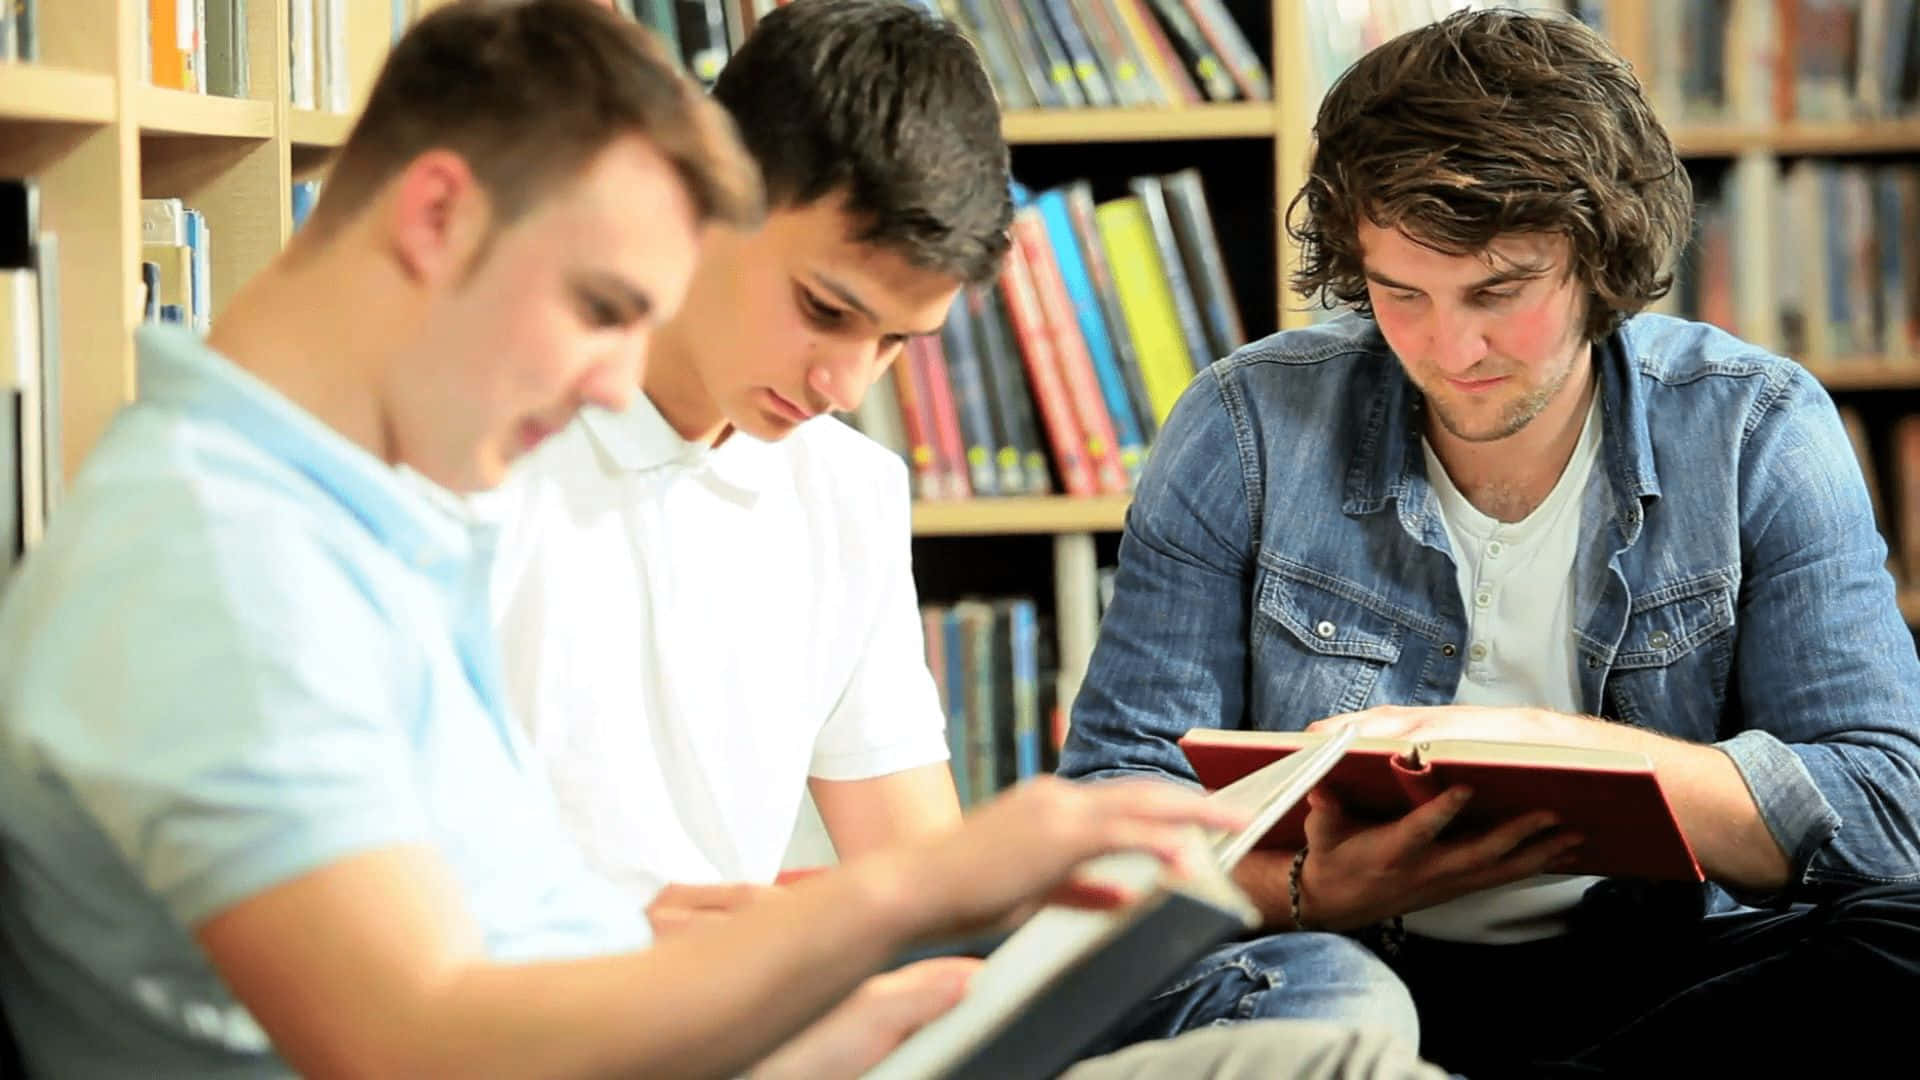 Students Studying Together Library.jpg Background